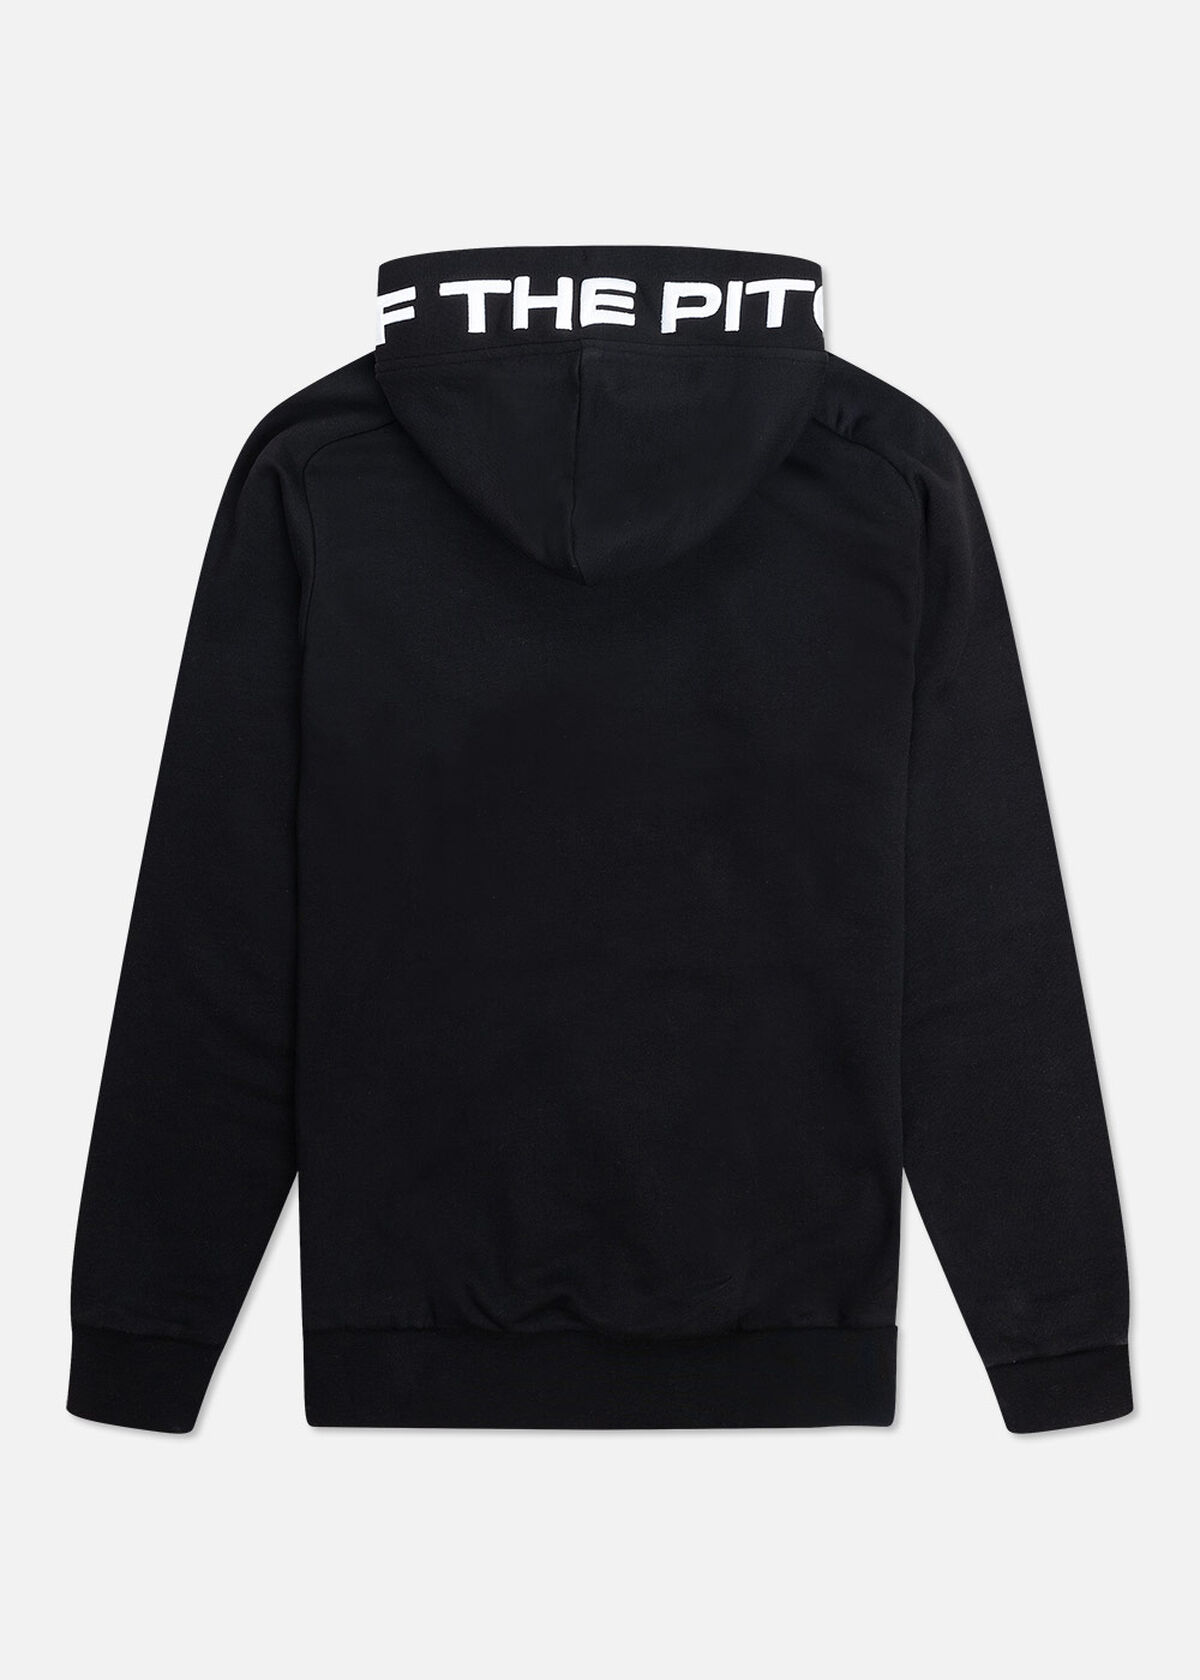 Private Pitch Hood Women - 65% Cotton / 35% Polyes, Black, hi-res